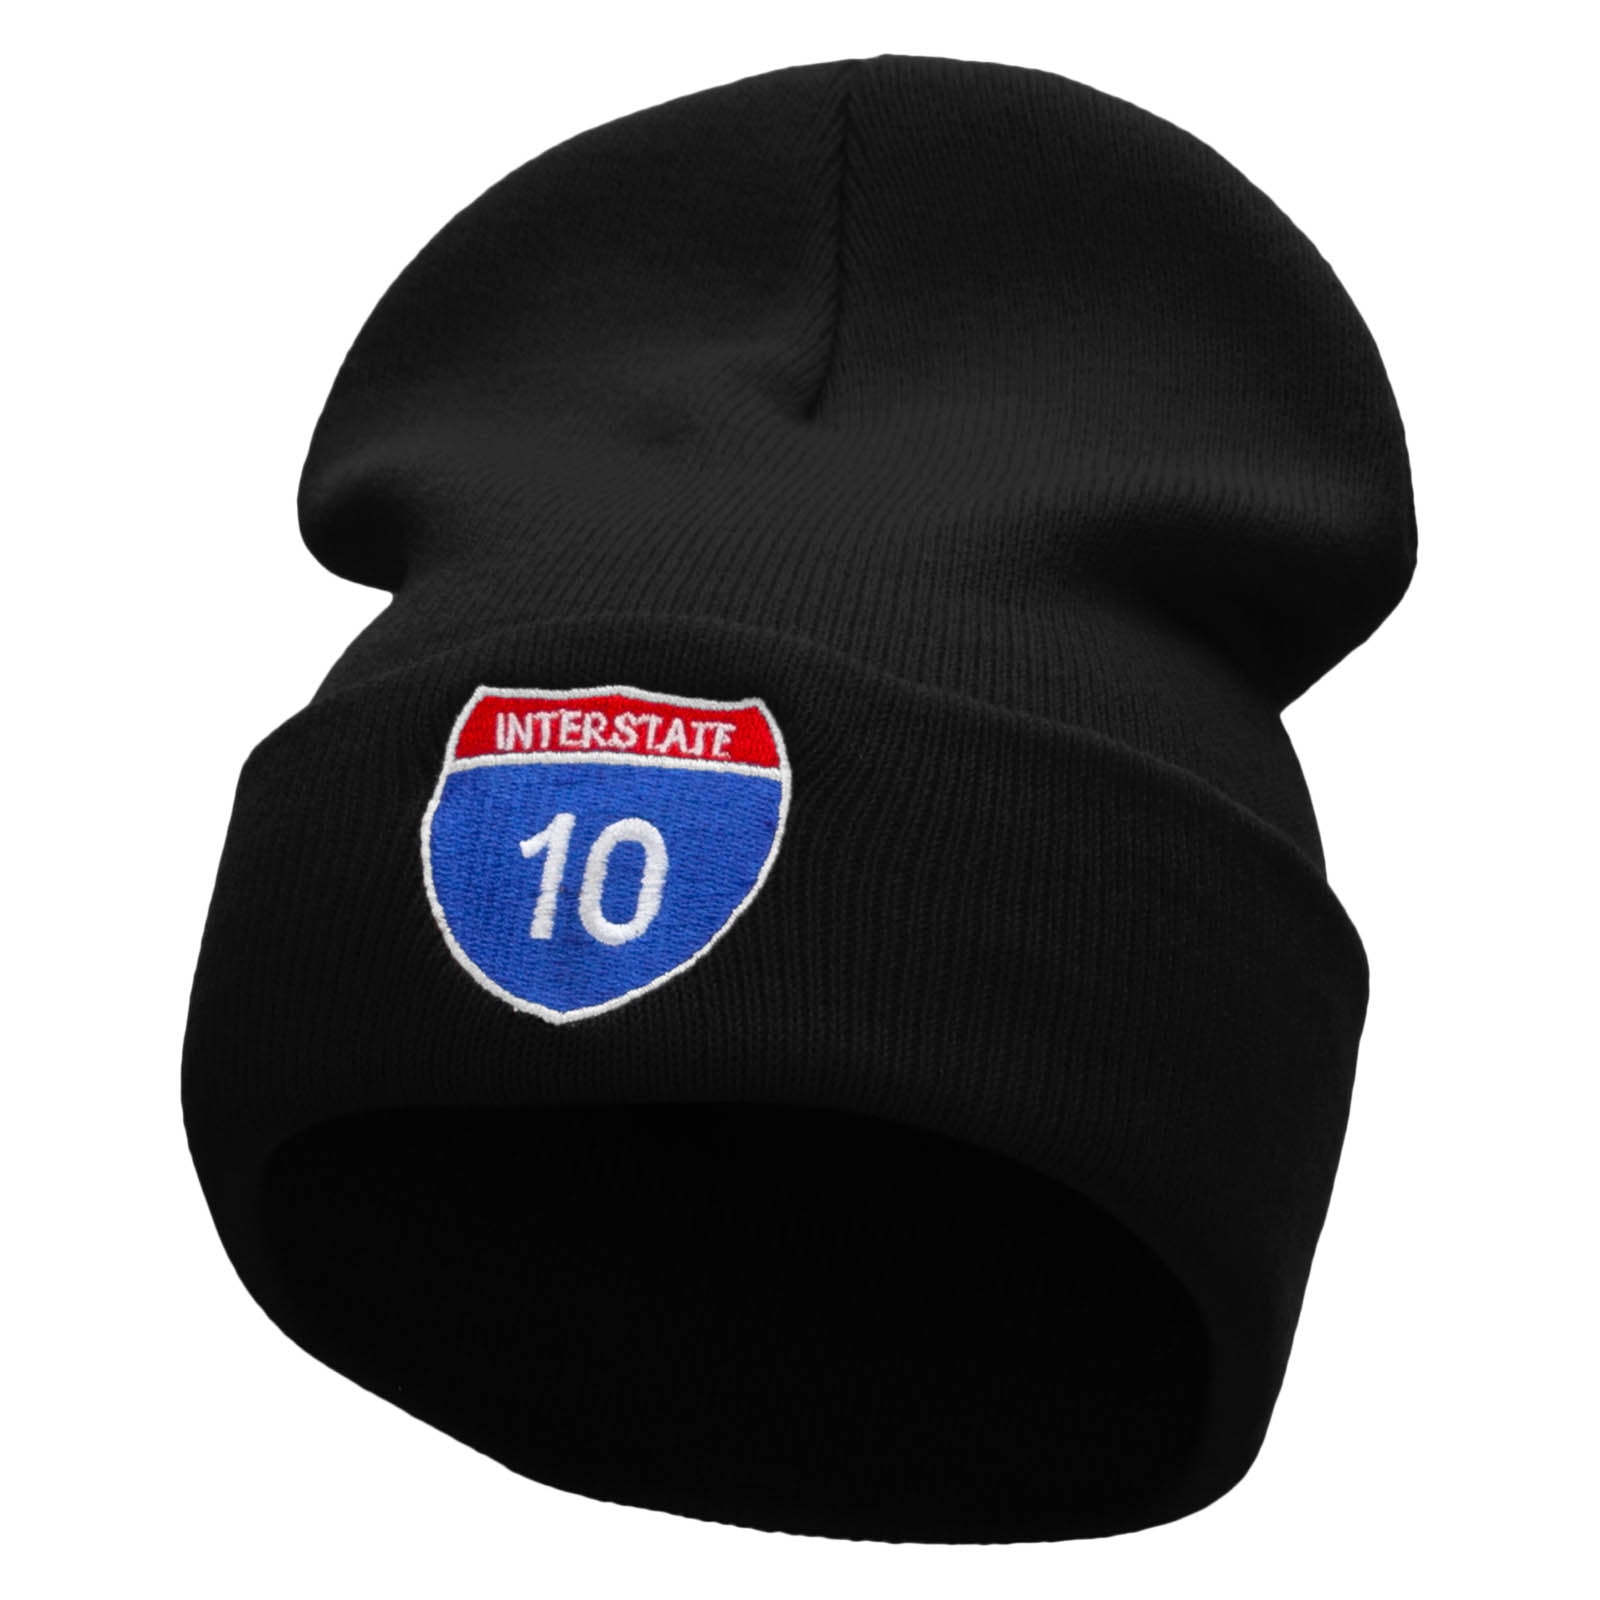 Interstate 10 Sign Embroidered 12 Inch Long Knitted Beanie - Black OSFM